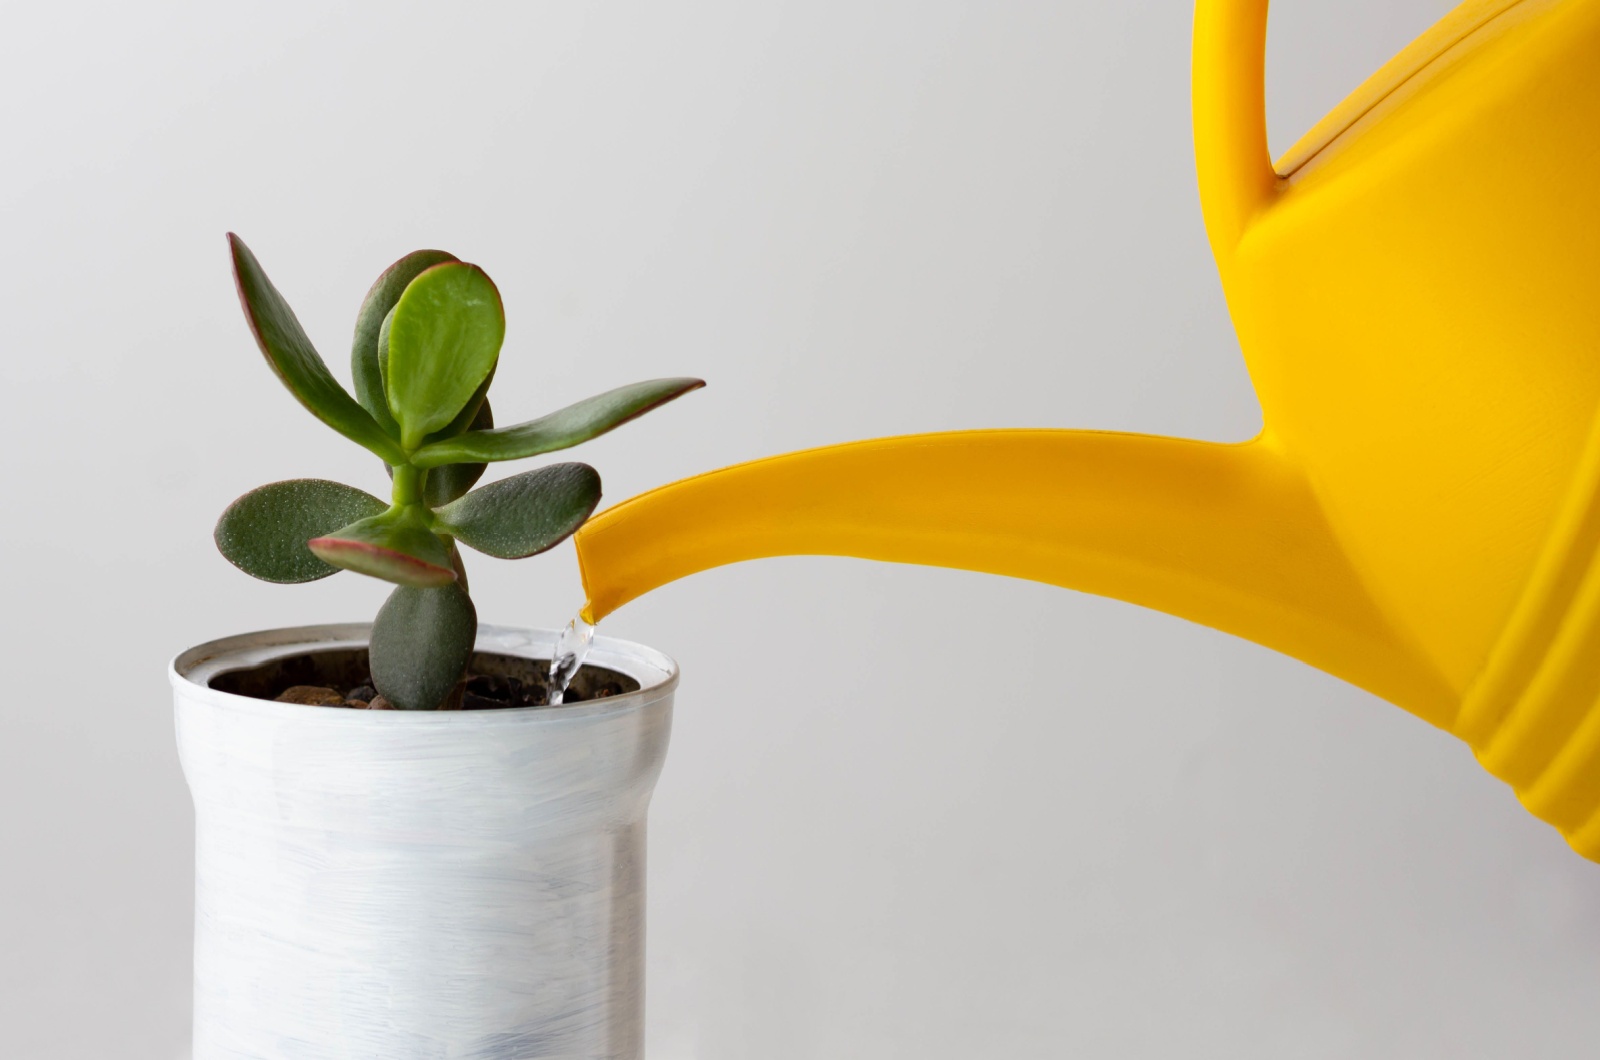 jade plant watered by yellow watering can